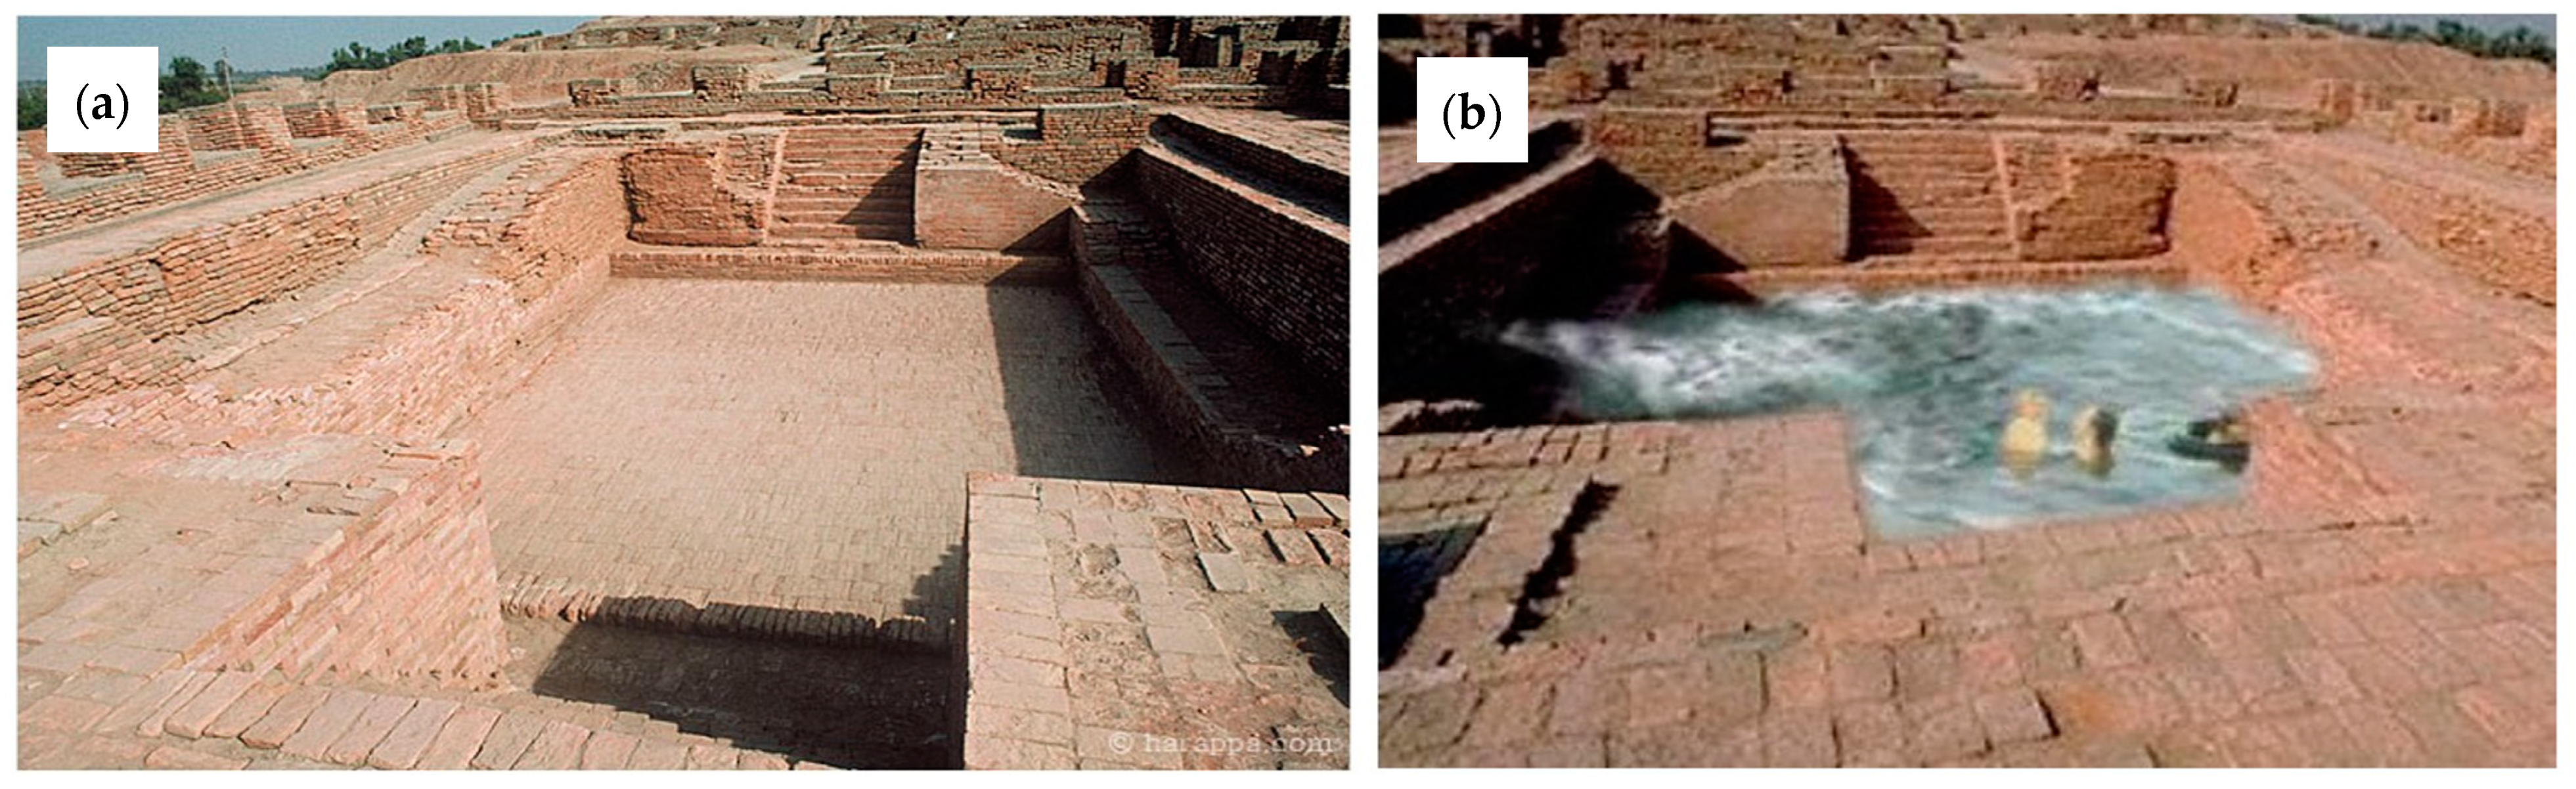 Water | Free Full-Text | Hydro-Technologies of Mehrgarh, Baluchistan and  Indus Valley Civilizations, Punjab, Pakistan (ca. 7000–1500 BC)